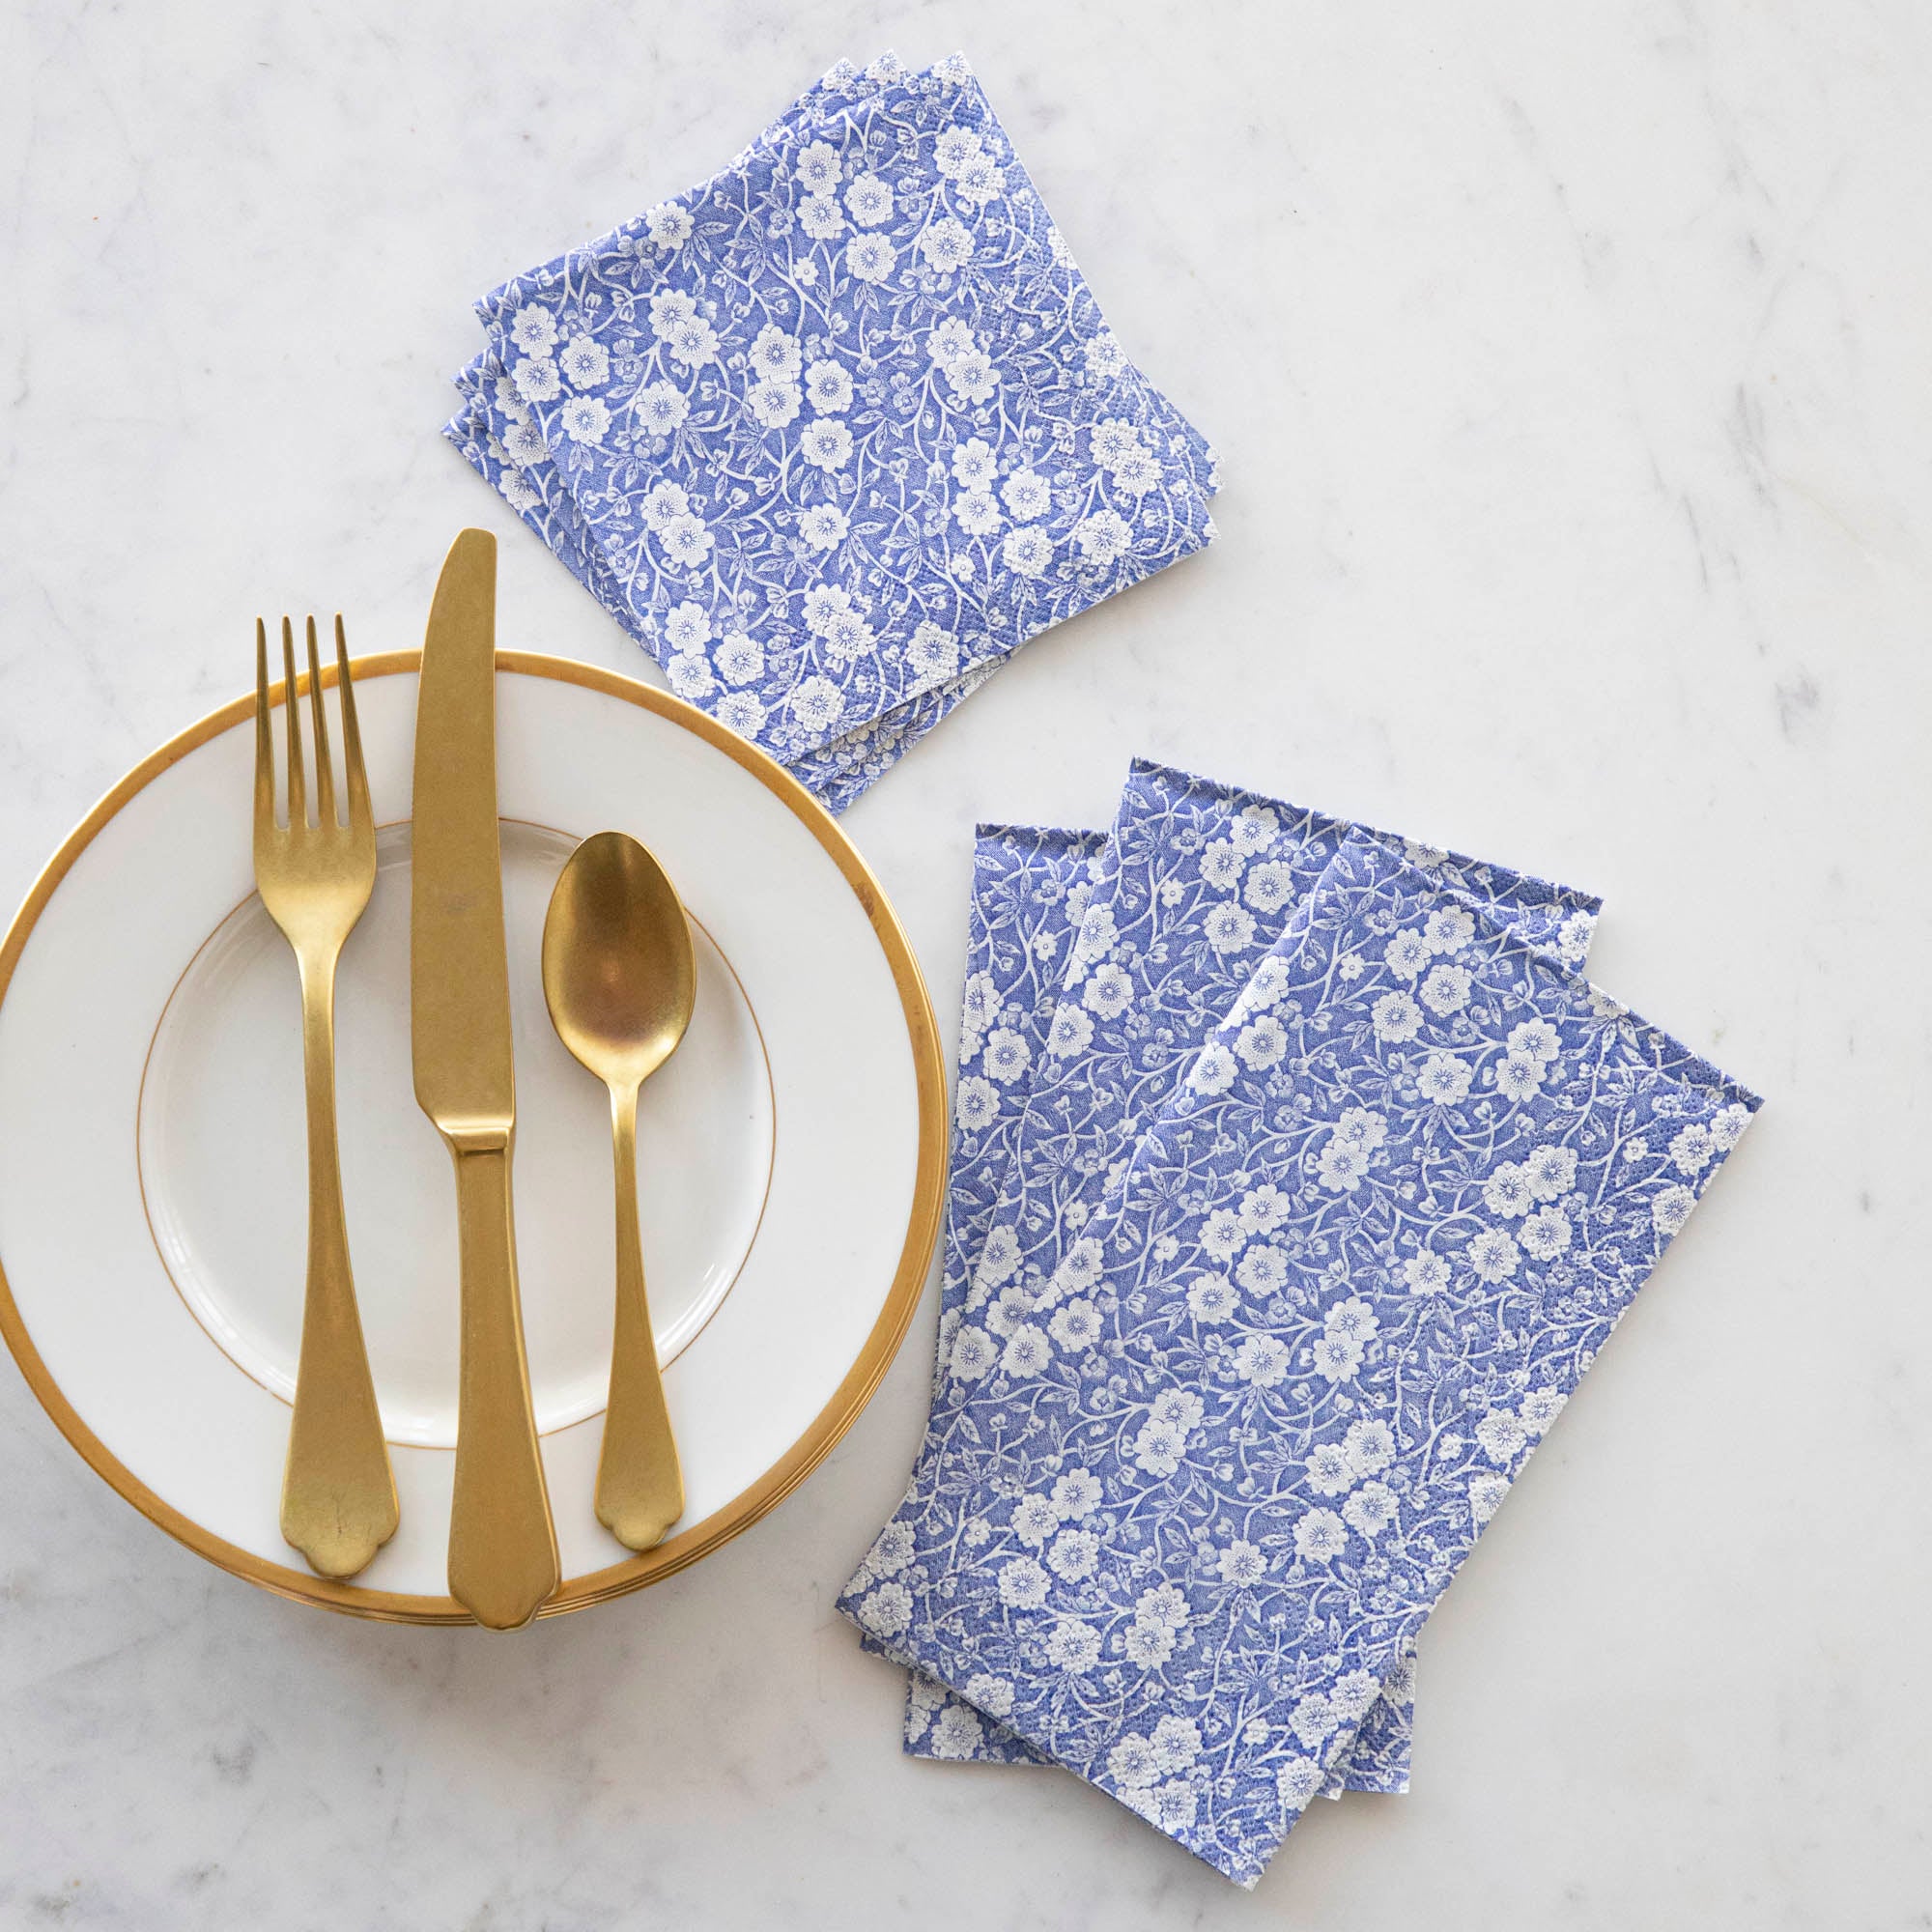 Blue Calico napkin set with beautiful gold forks and spoons by Hester &amp; Cook.